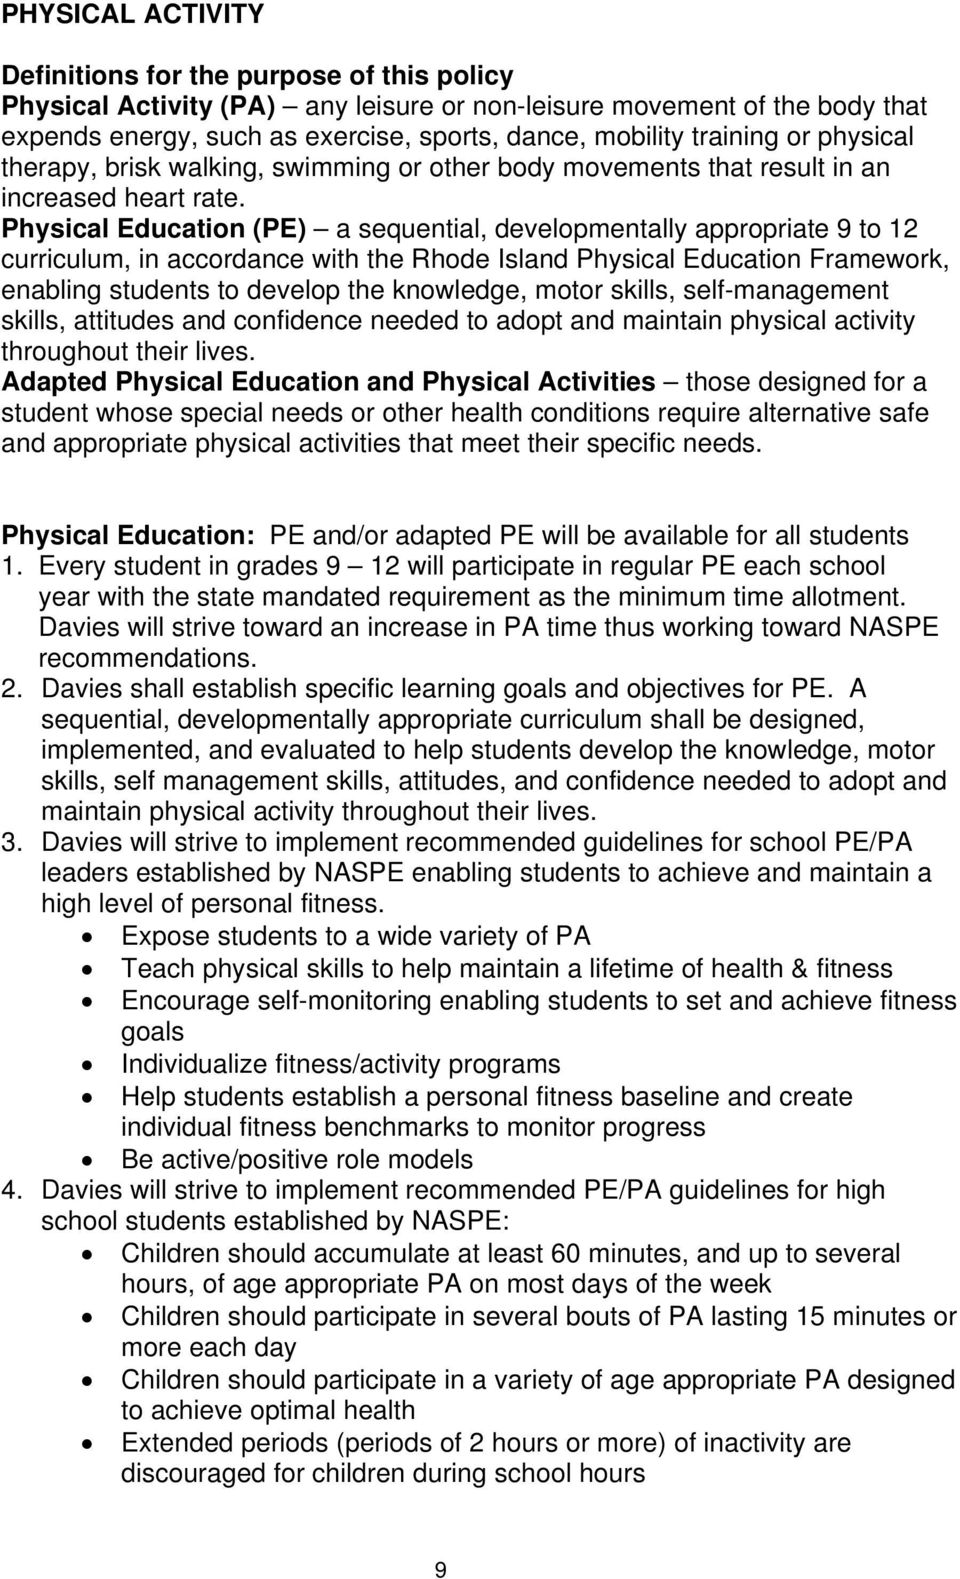 Physical Education (PE) a sequential, developmentally appropriate 9 to 12 curriculum, in accordance with the Rhode Island Physical Education Framework, enabling students to develop the knowledge,